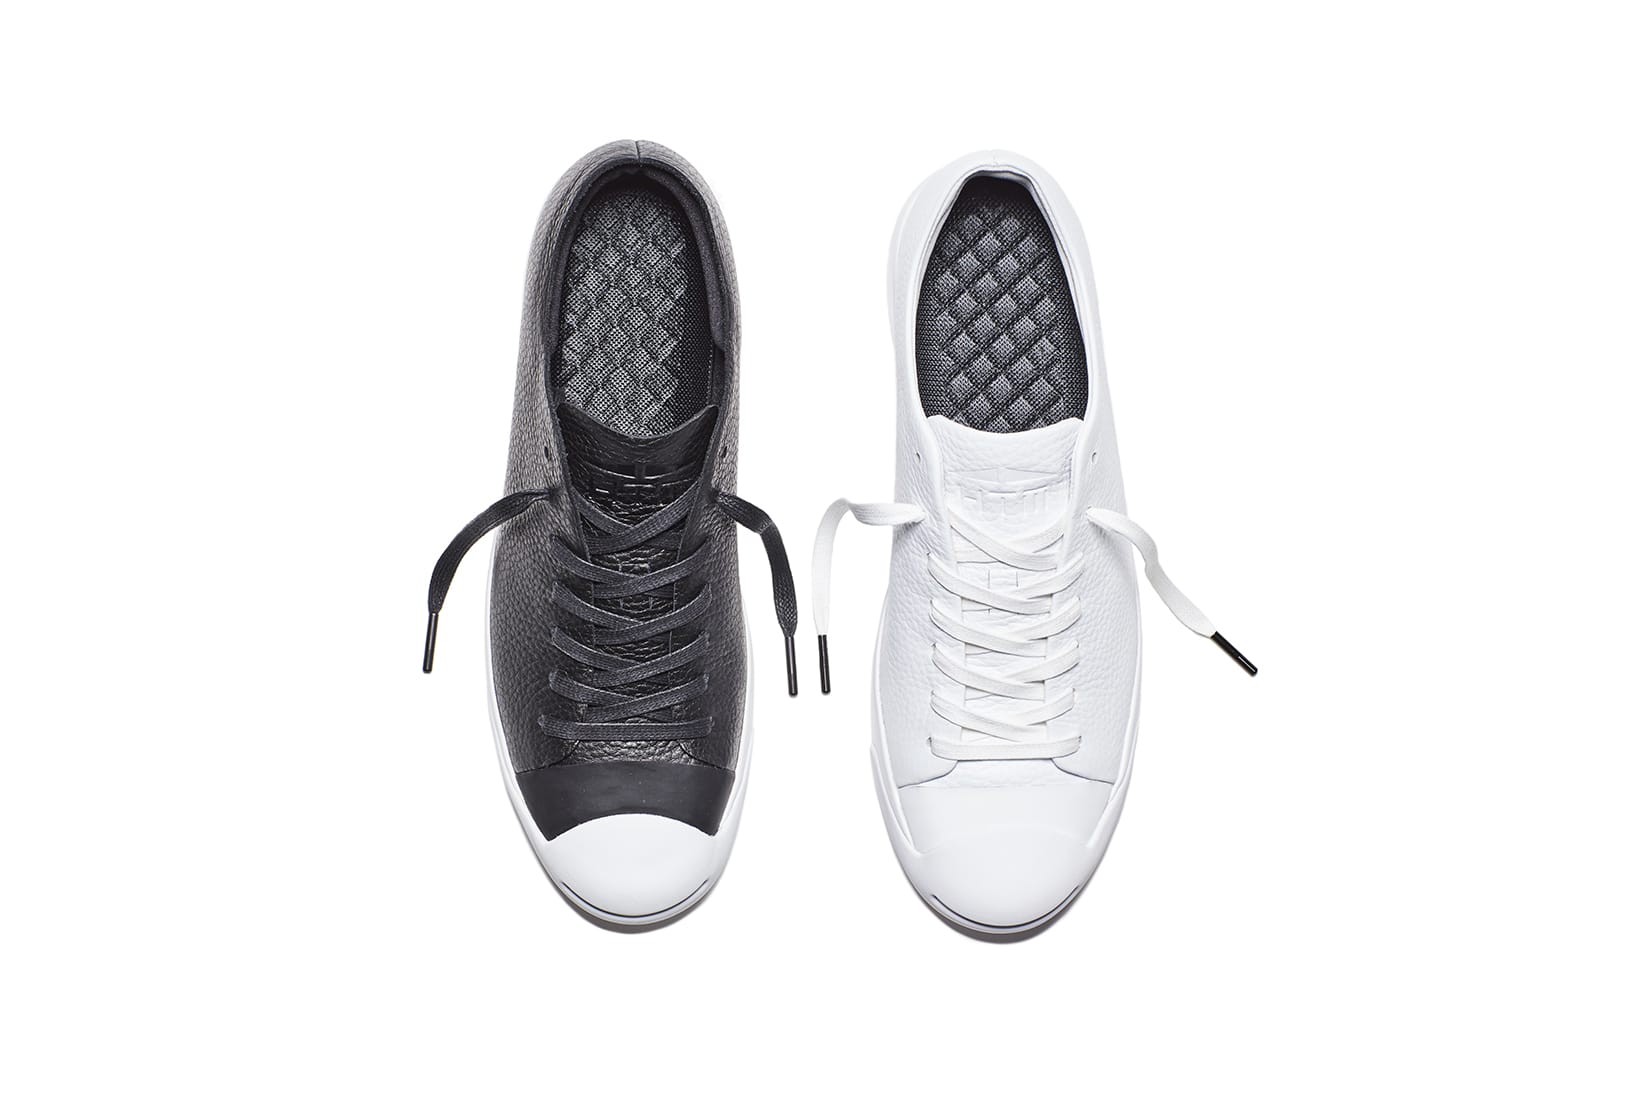 converse jack purcell classic low top